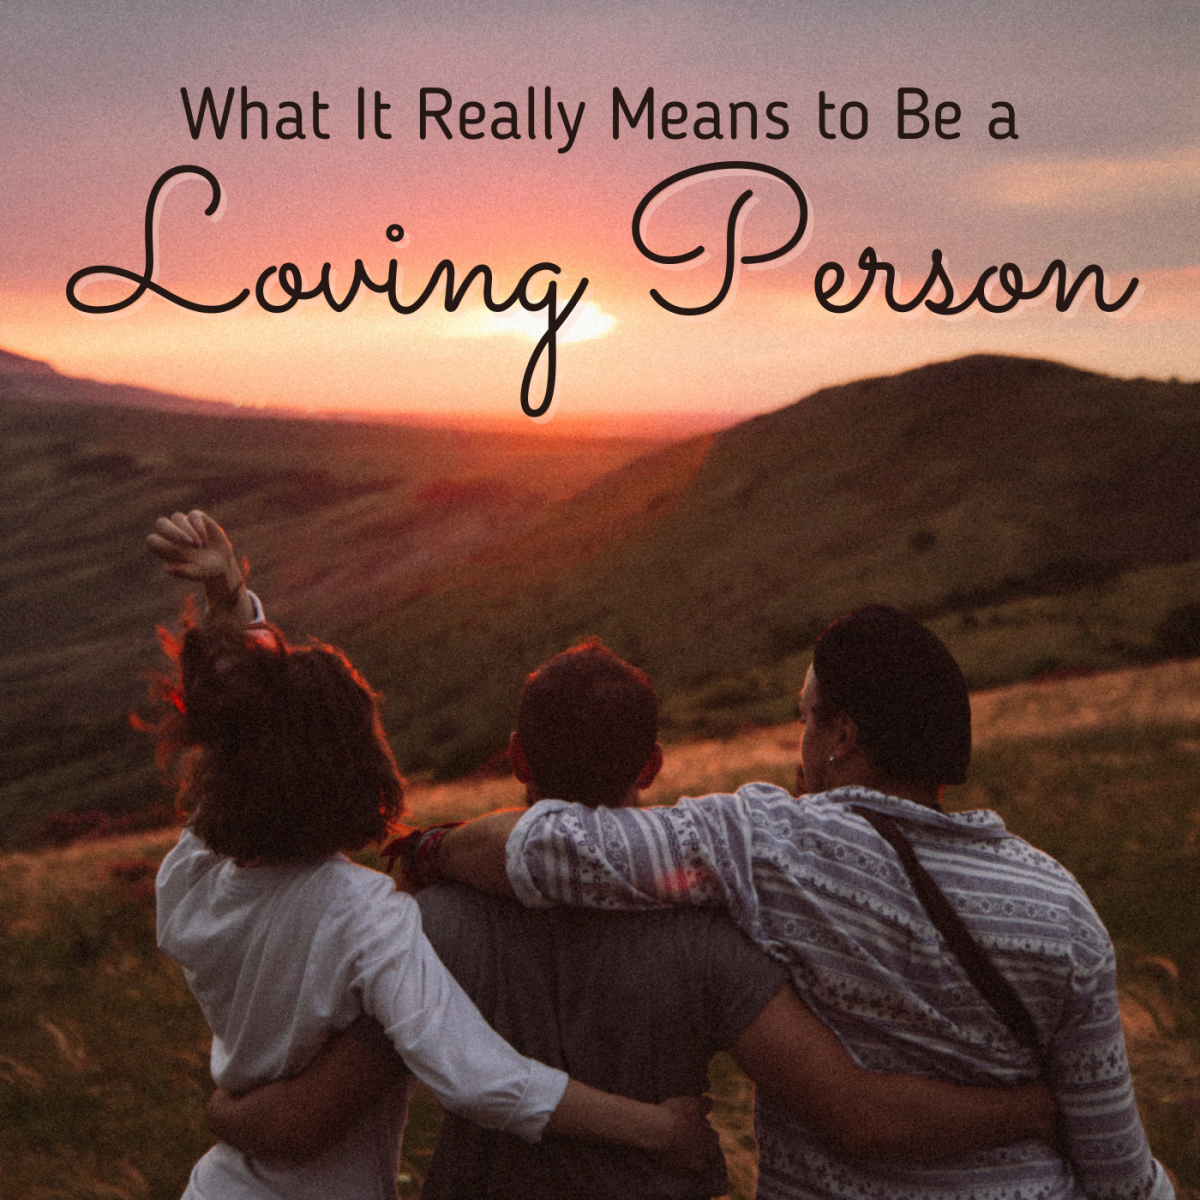 What It Means to Be Loving